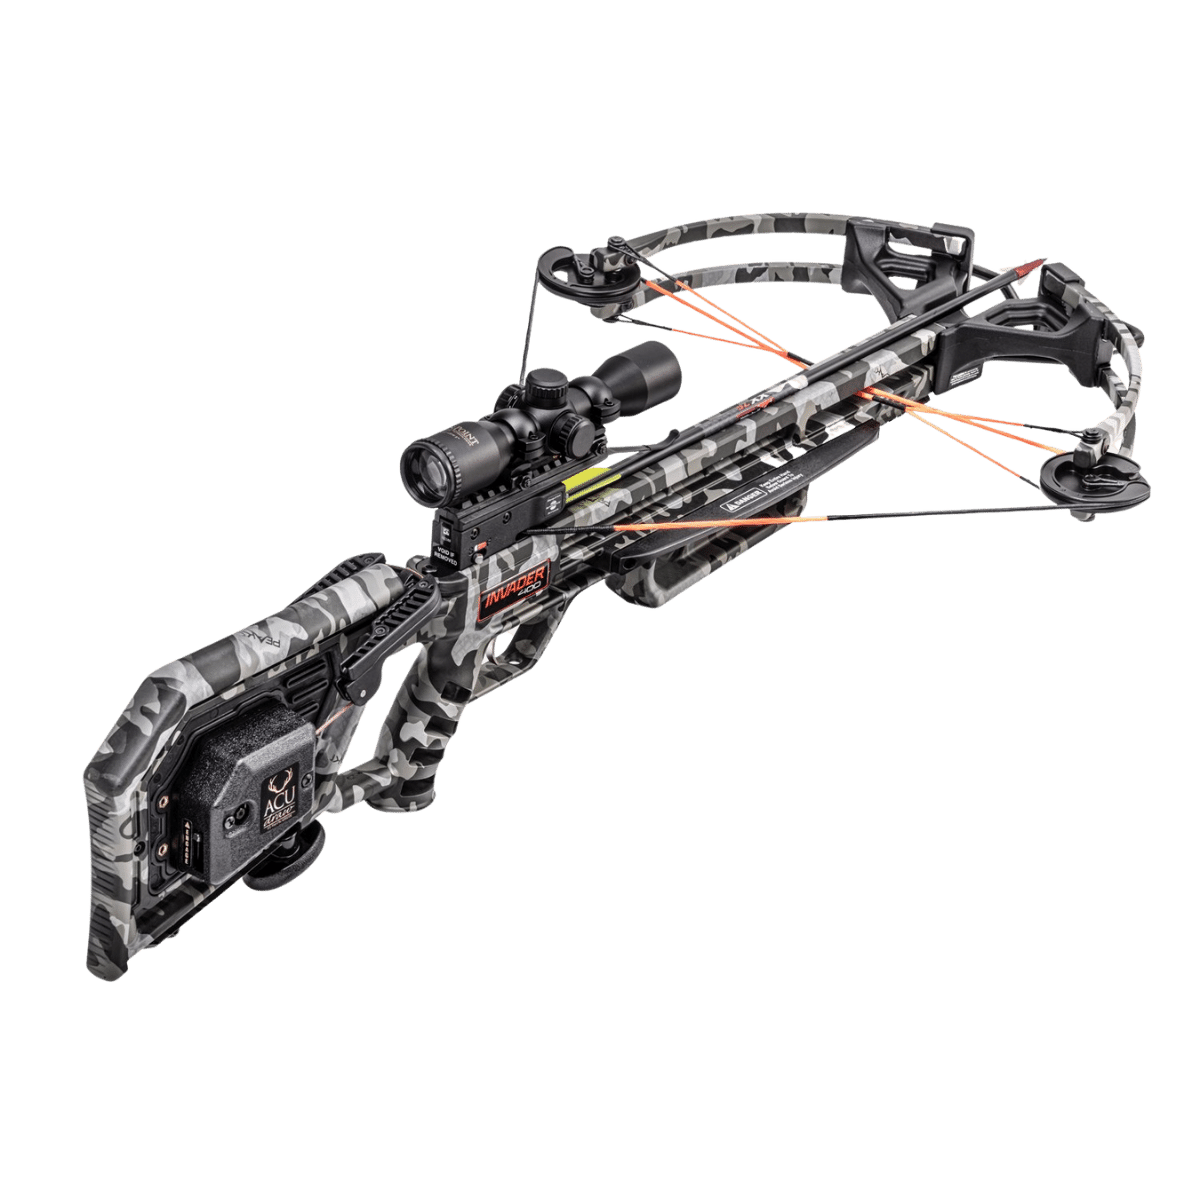 Wicked Ridge Invader 400 Compound Crossbow Package 400fps - Fast UK Shipping | Tactical Archery UK